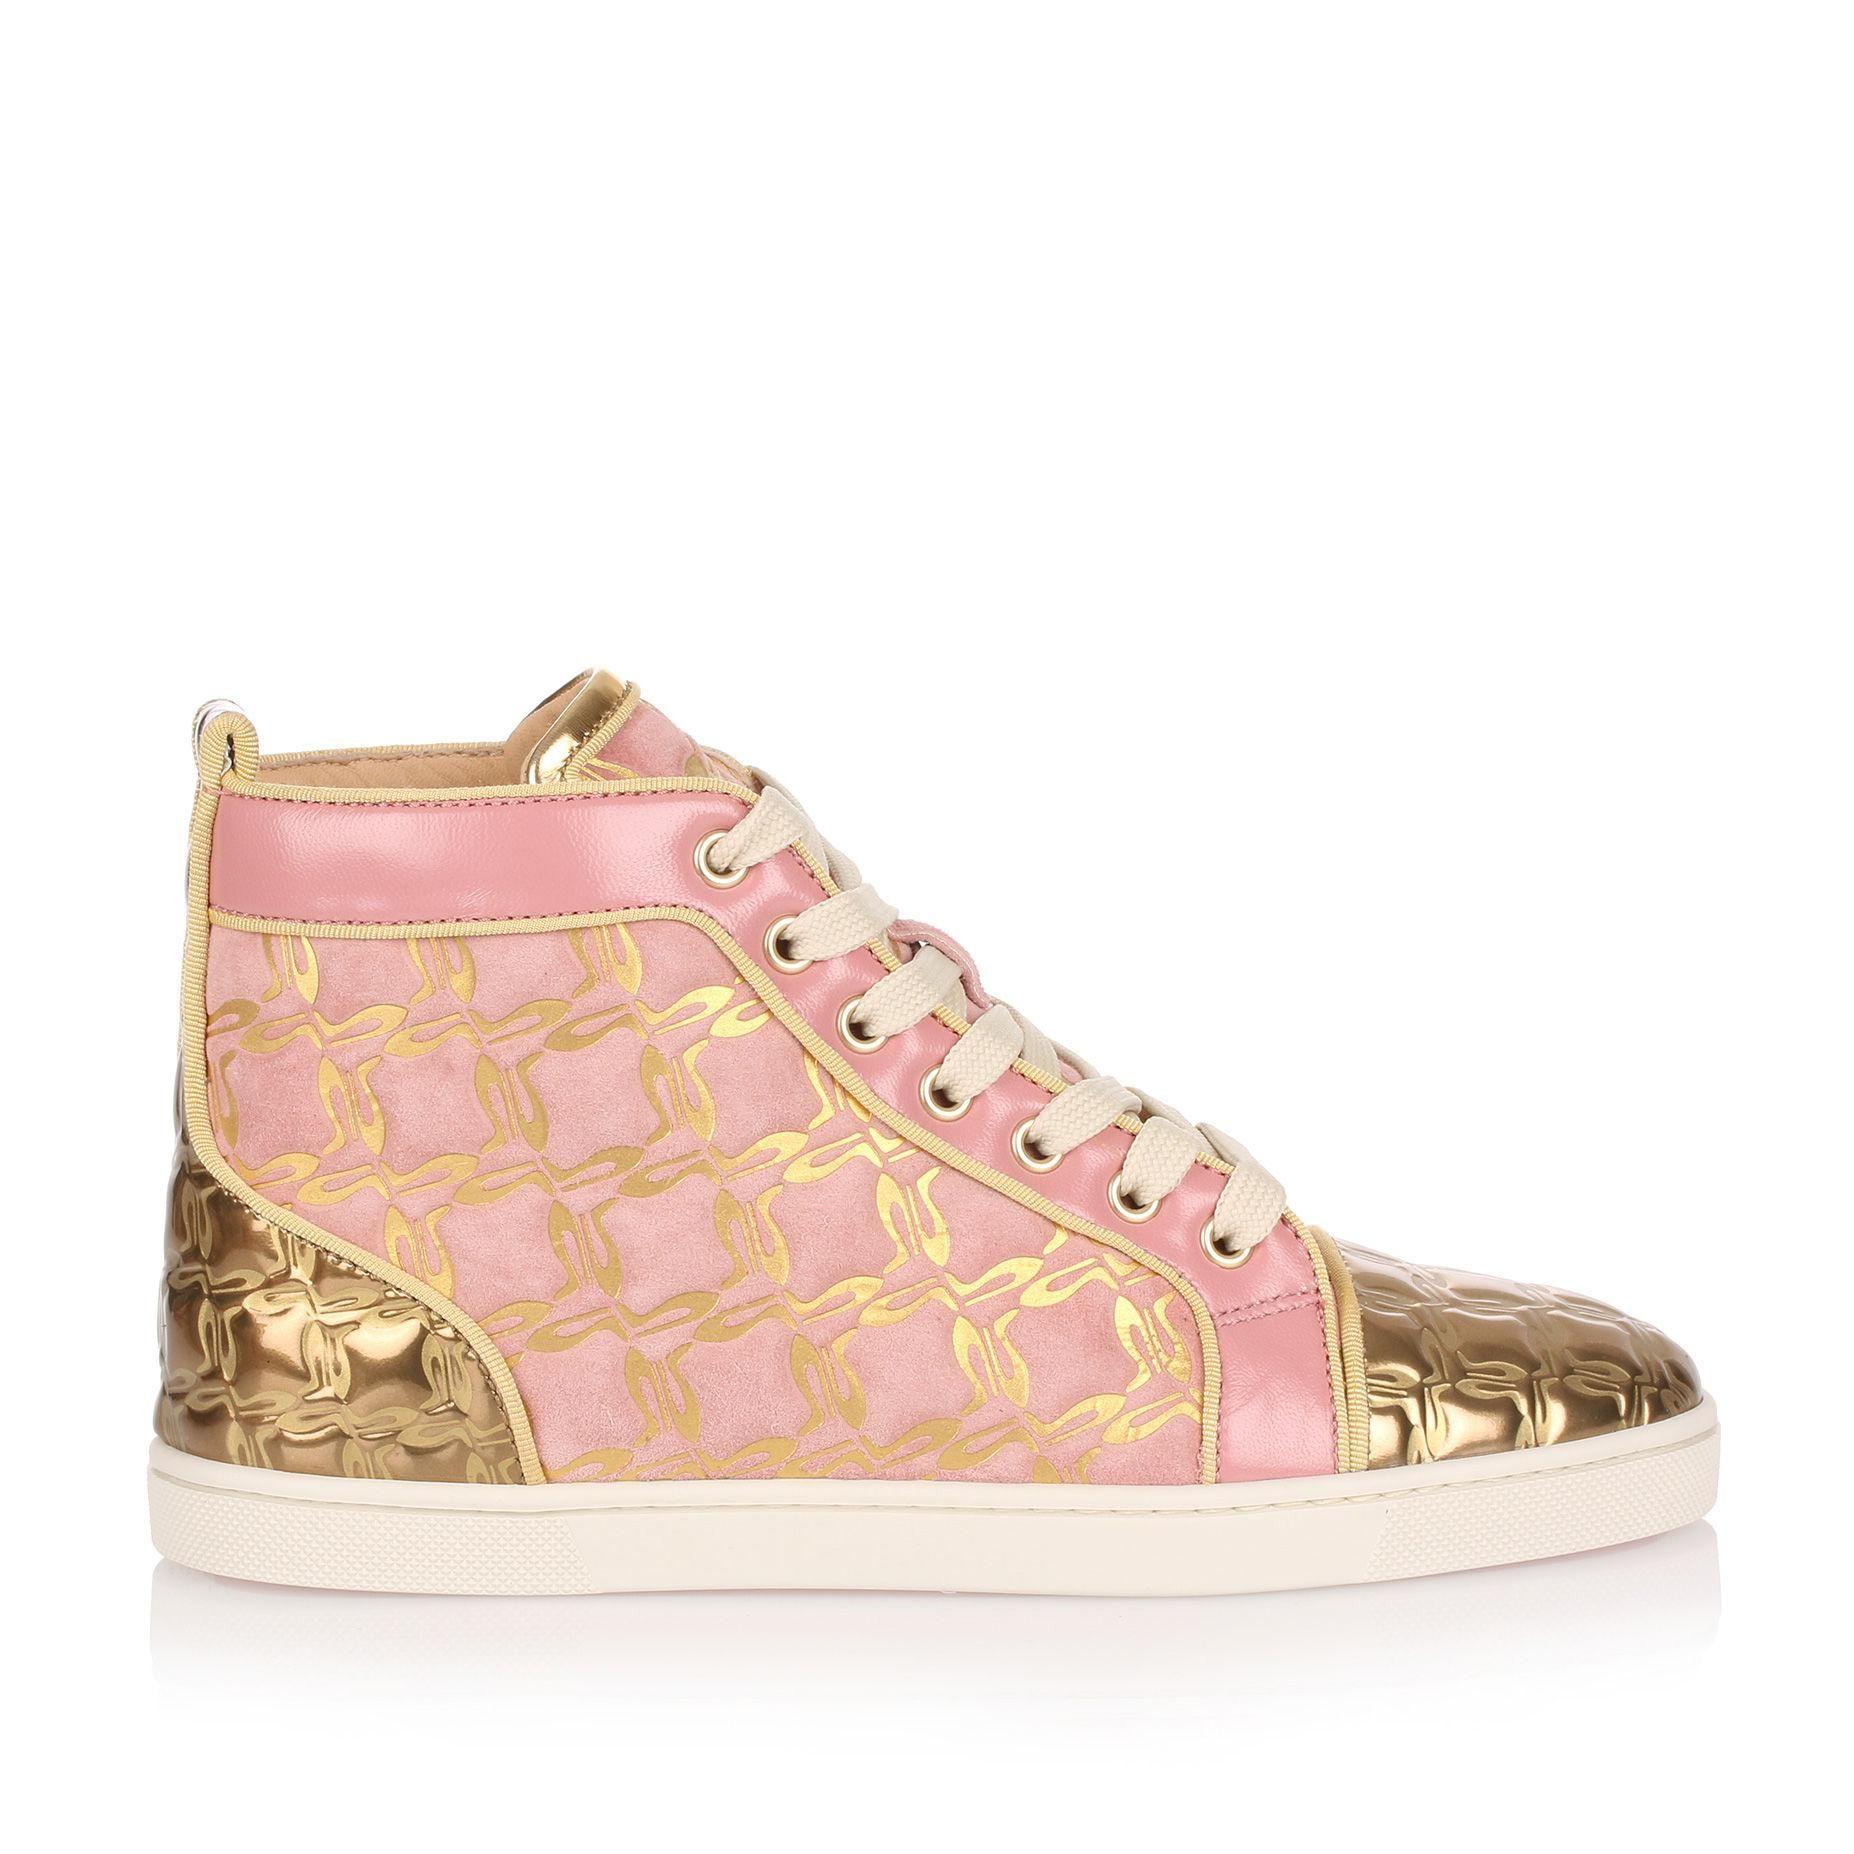 Gold Christian Louboutin Logo - Lyst Louboutin Bip Bip Pink And Gold Suede Sneaker Us